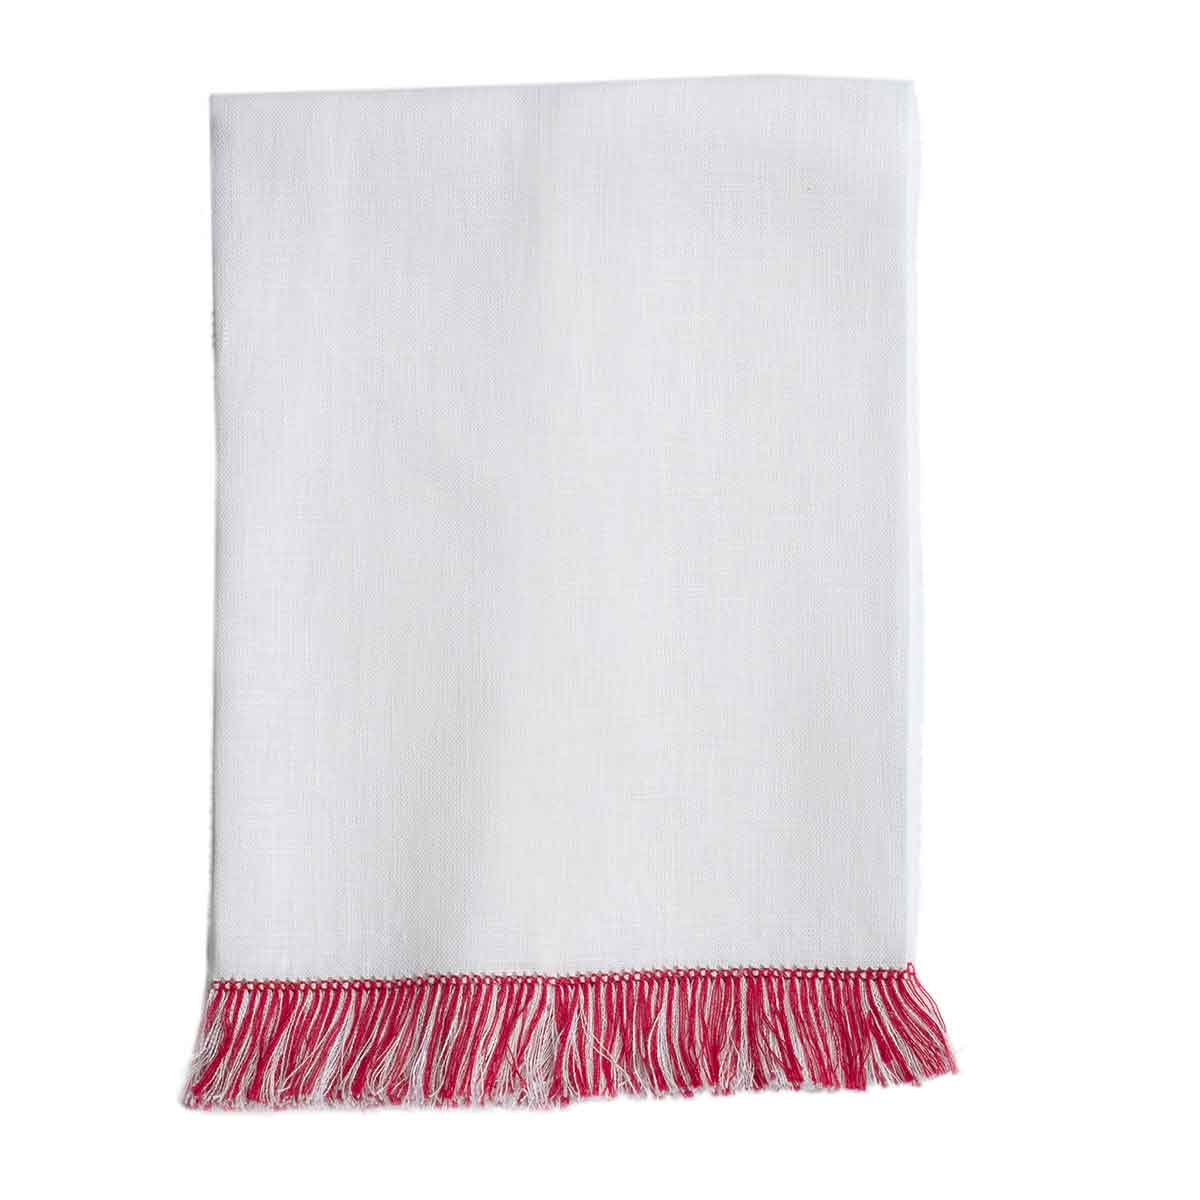 Fringe Benefits Guest Towel Merry Red | Garden Folly Fine Linens - hand towels for embroidering, fancy linen hand towels, fancy linen guest towels